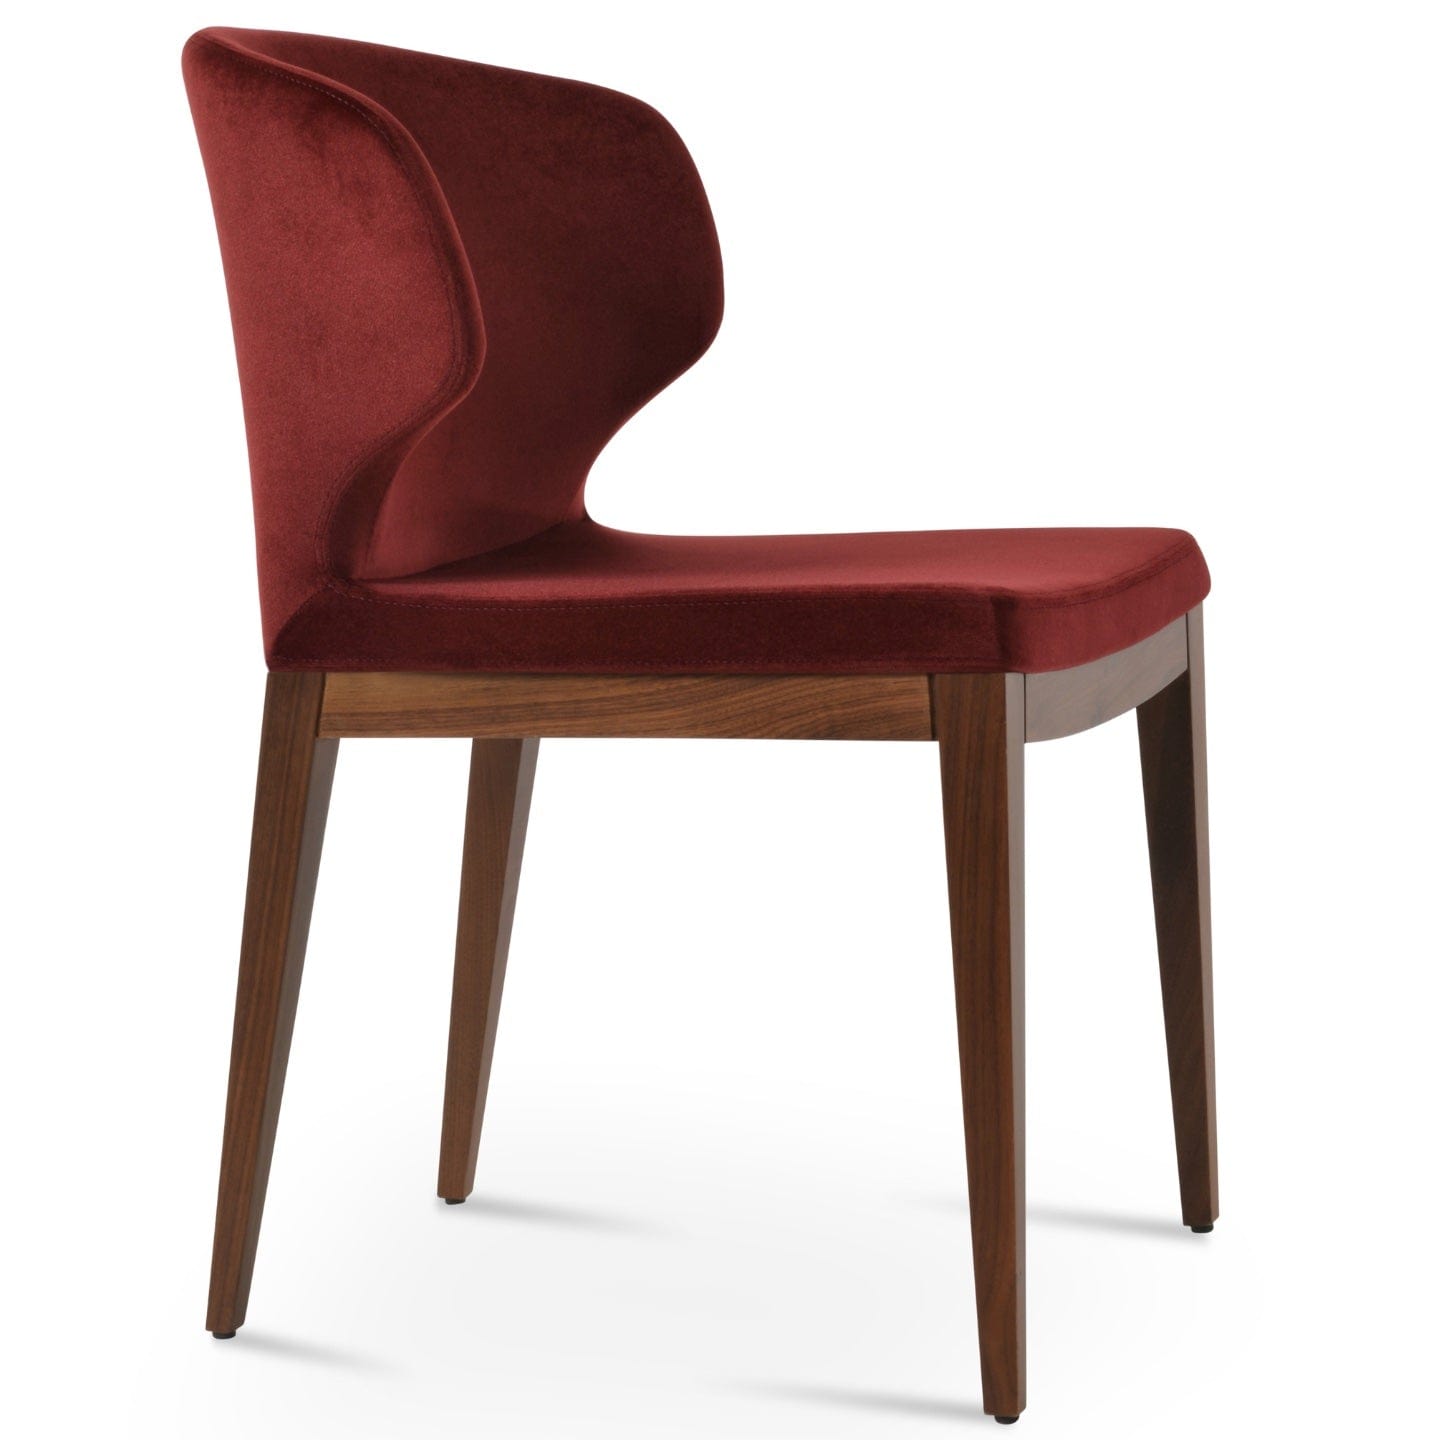 sohoConcept Kitchen & Dining Room Chairs Amed Wood PLUS Chairs | Velvet Upholstered Wooden Dining Chairs